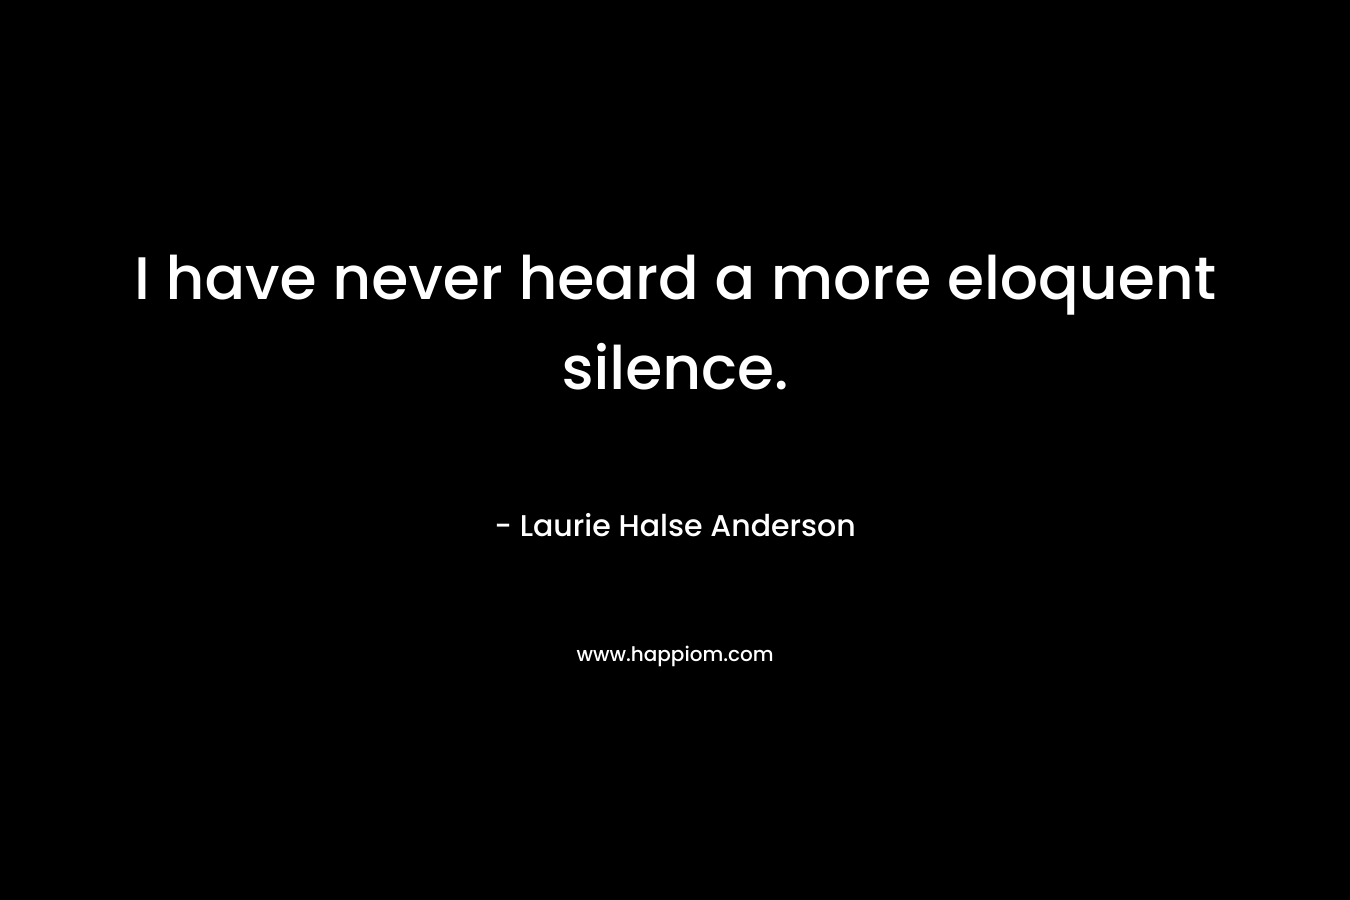 I have never heard a more eloquent silence.